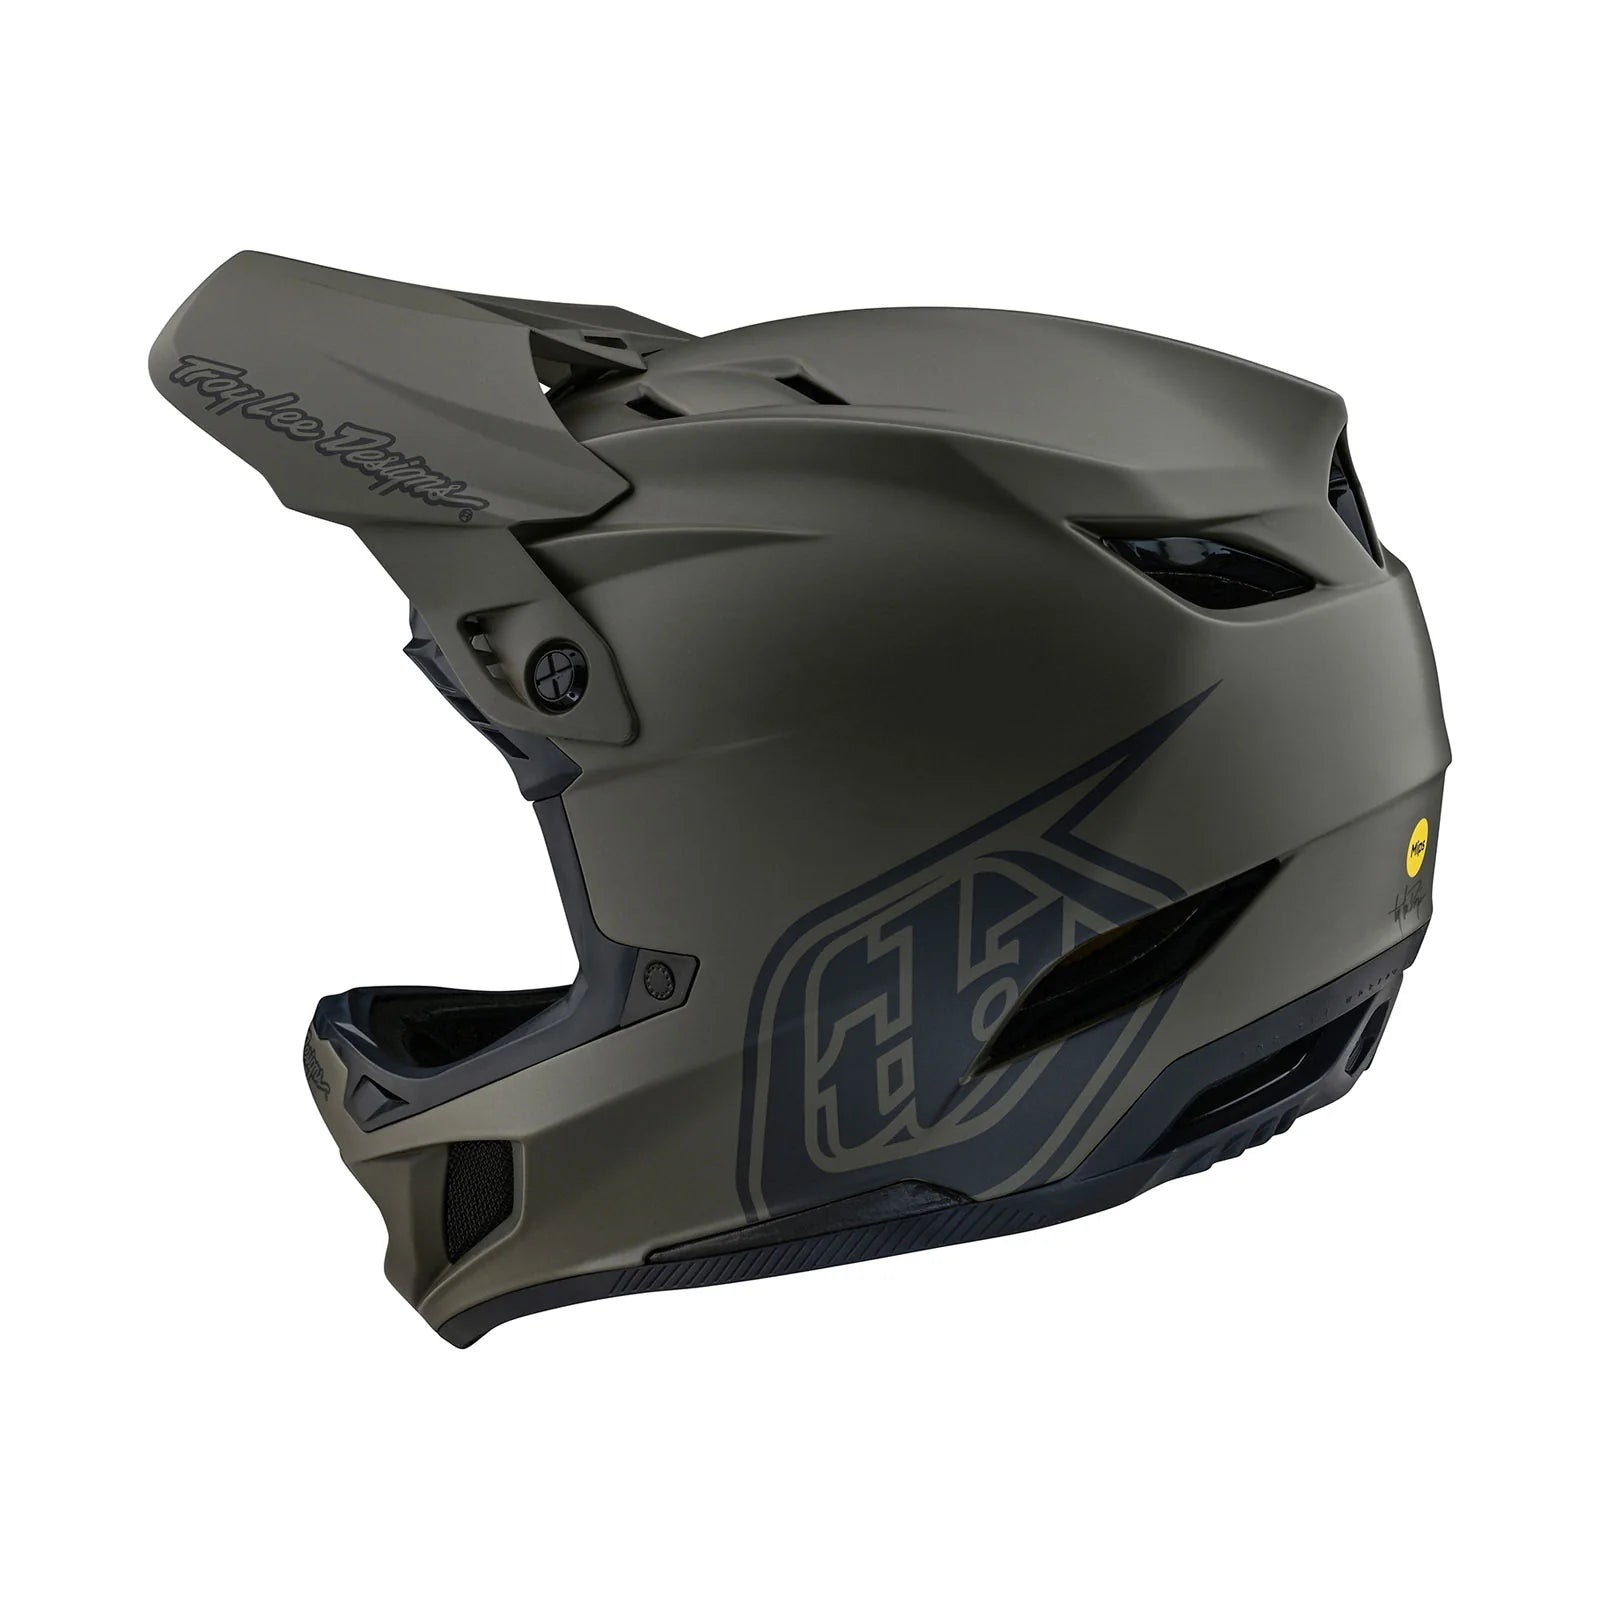 The TLD D4 AS Composite Helmet W/MIPS Stealth Tarmac is shown on a white background.